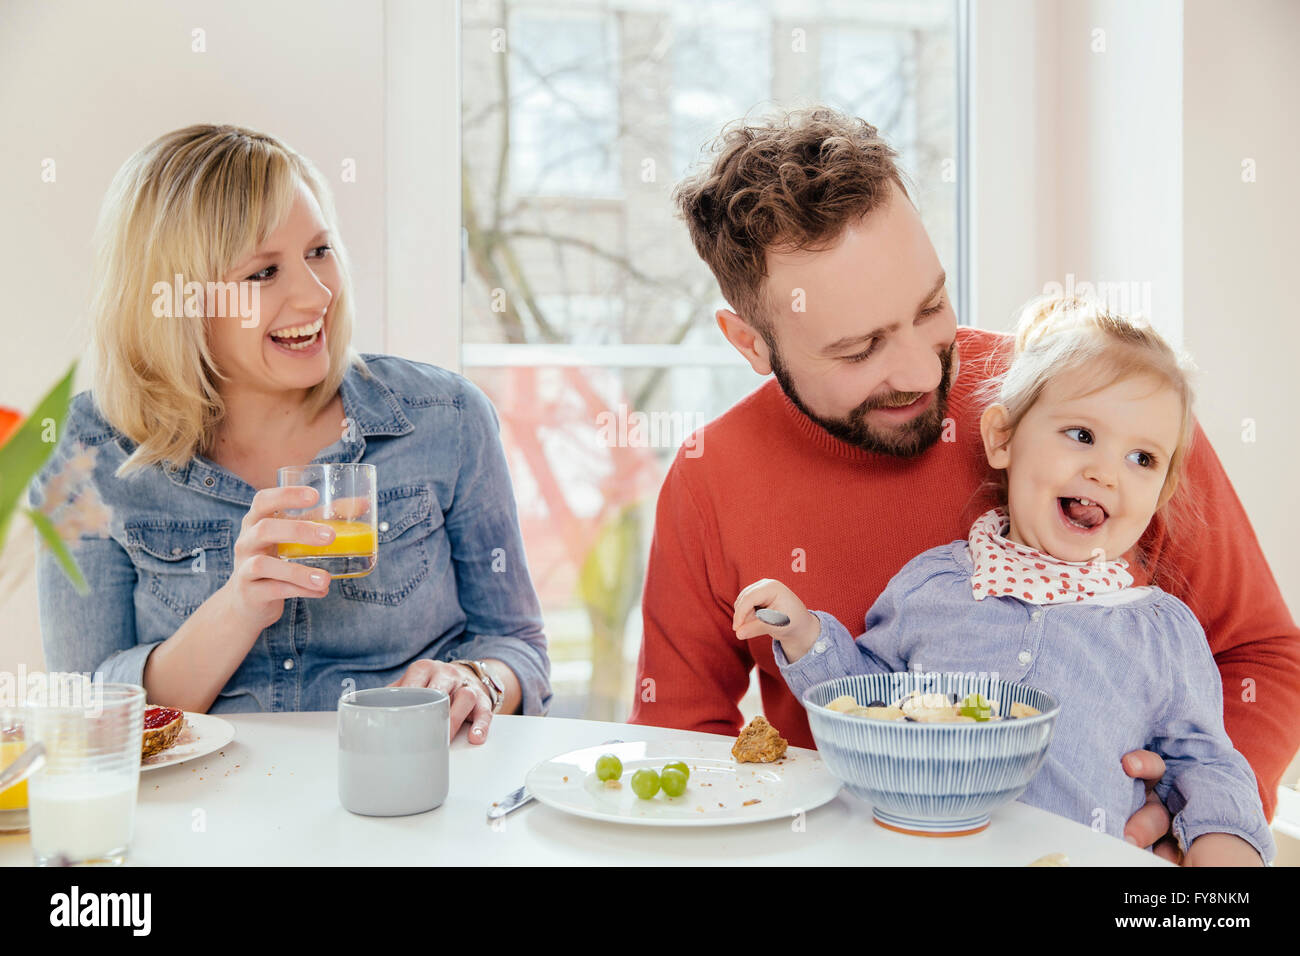 Little girl eating muesli with fruit at breakfast table Stock Photo